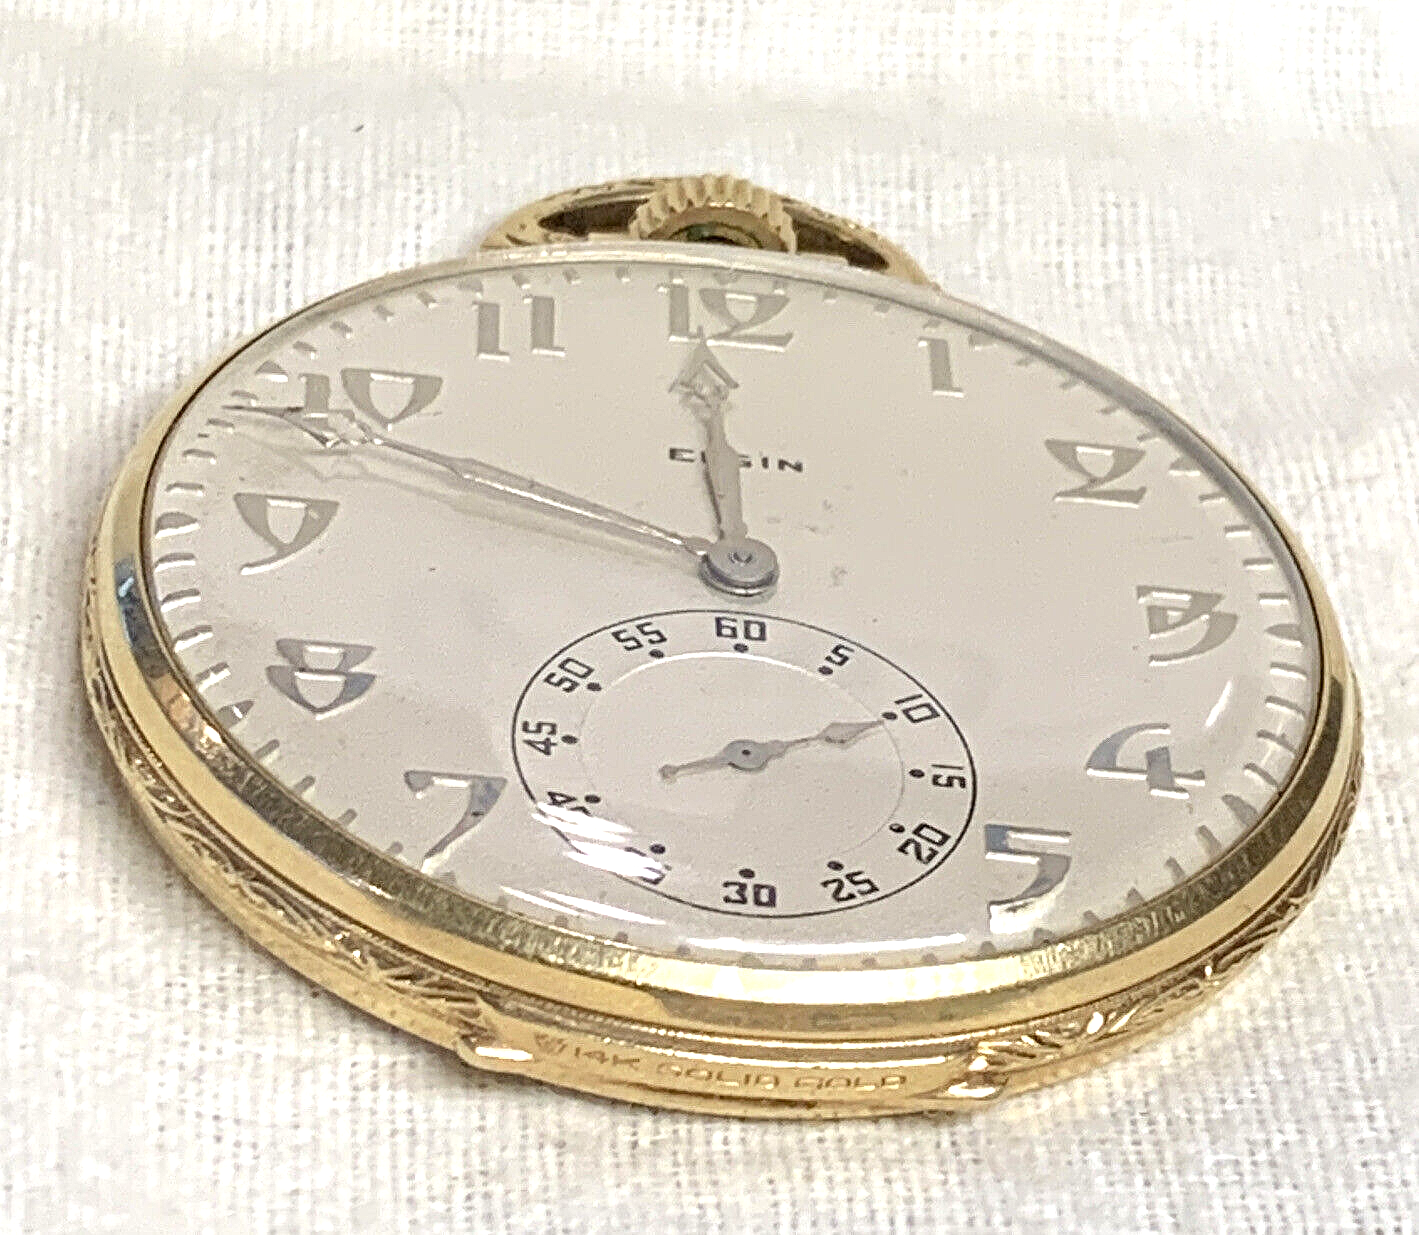 ELGIN 14K Solid Gold 44mm Open Face Pocket Watch - Runs Great Excellent Cond.